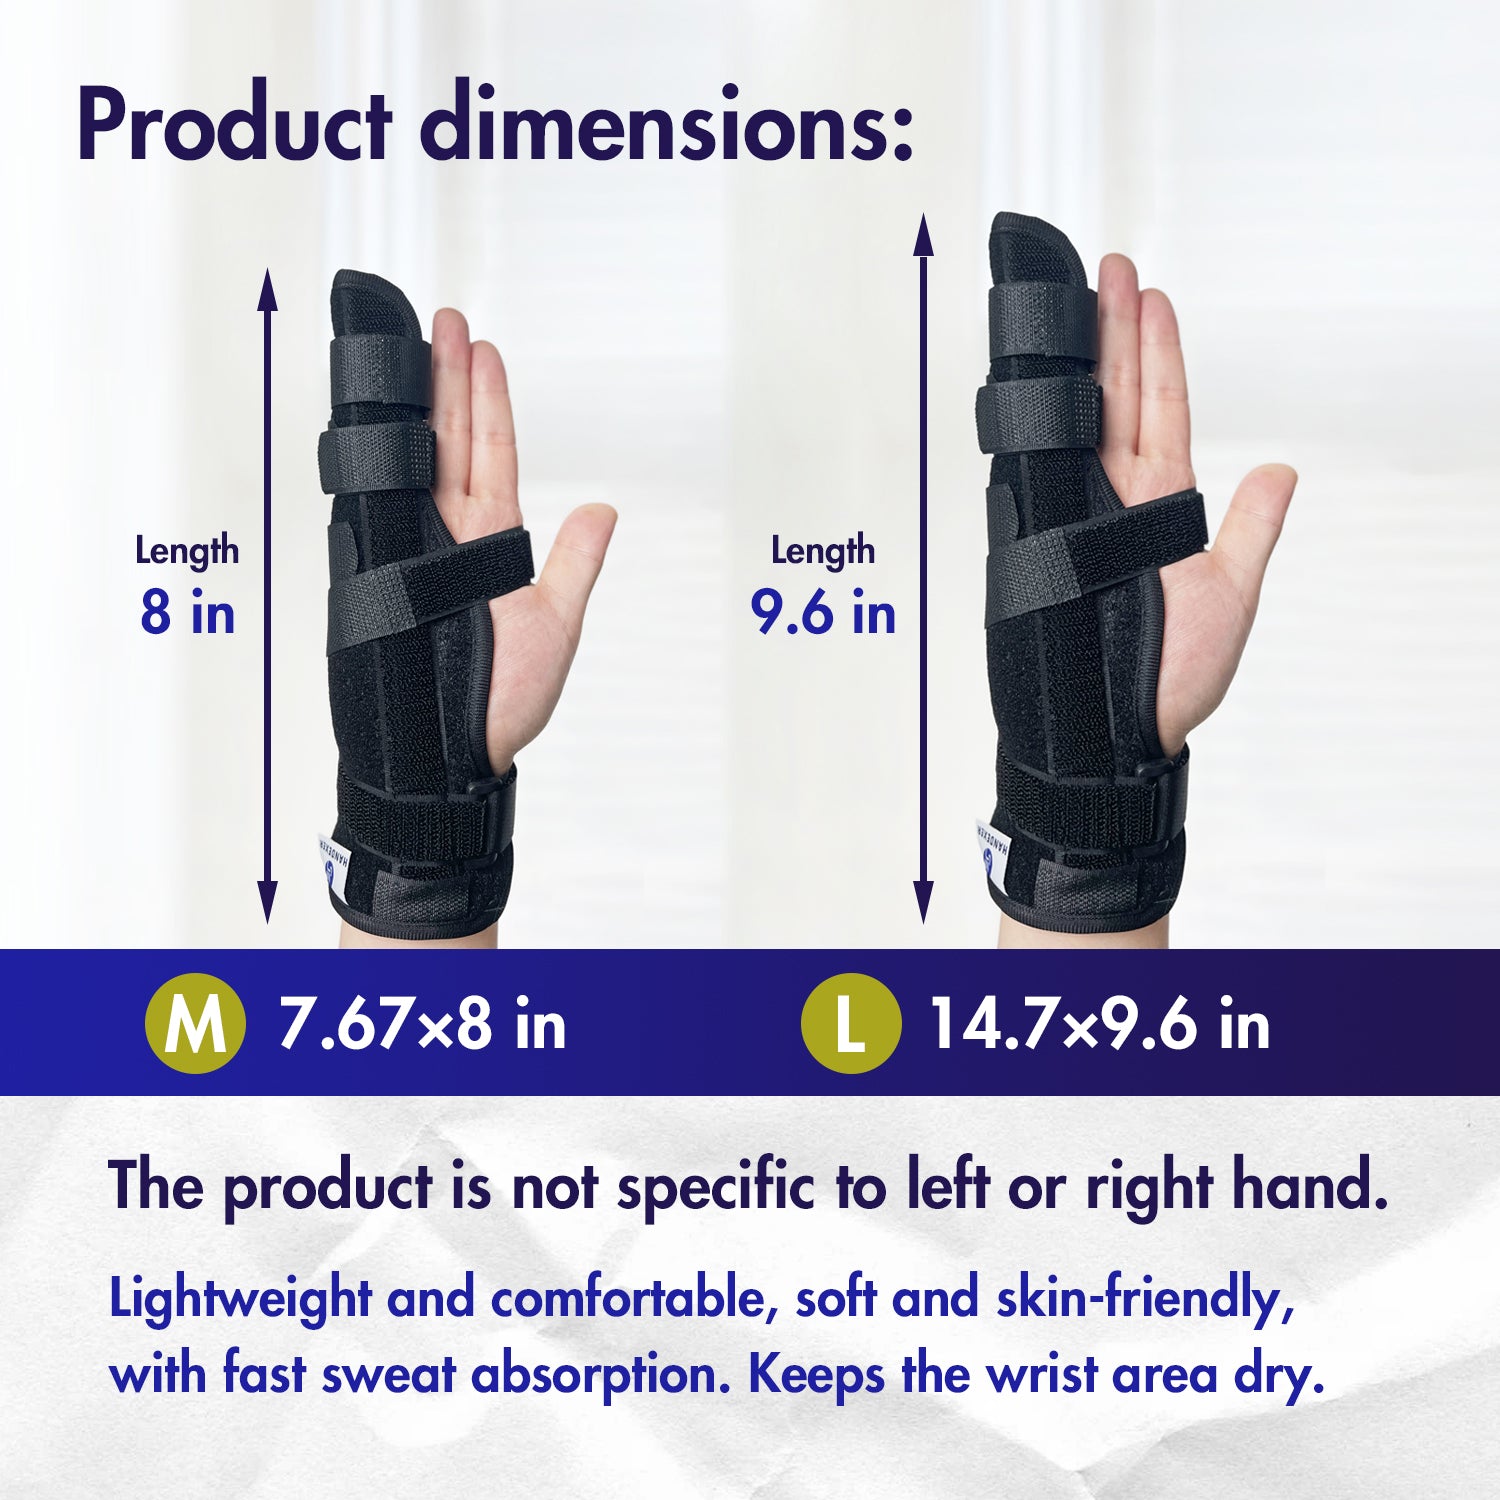 Two Fingers Glove,Professional Thumb + Index Finger Glove for